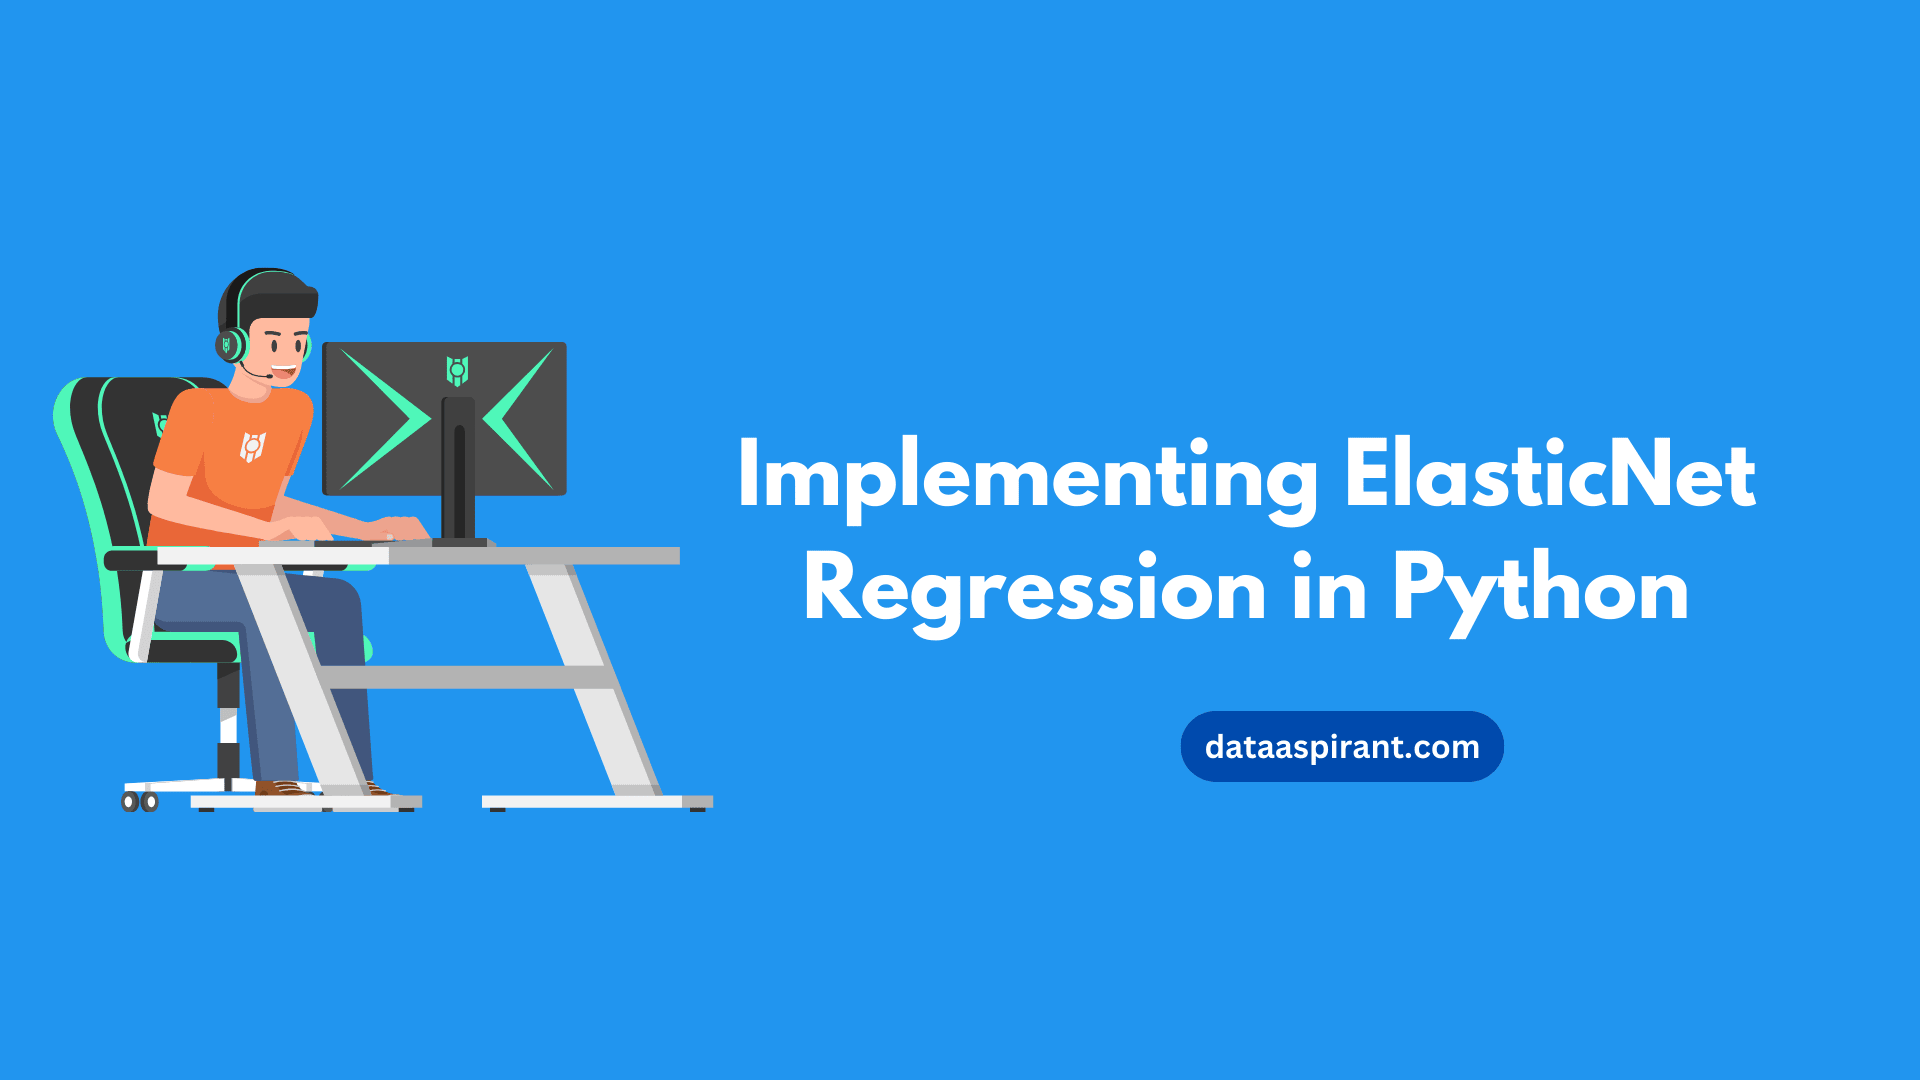 Implementing ElasticNet Regression in Python